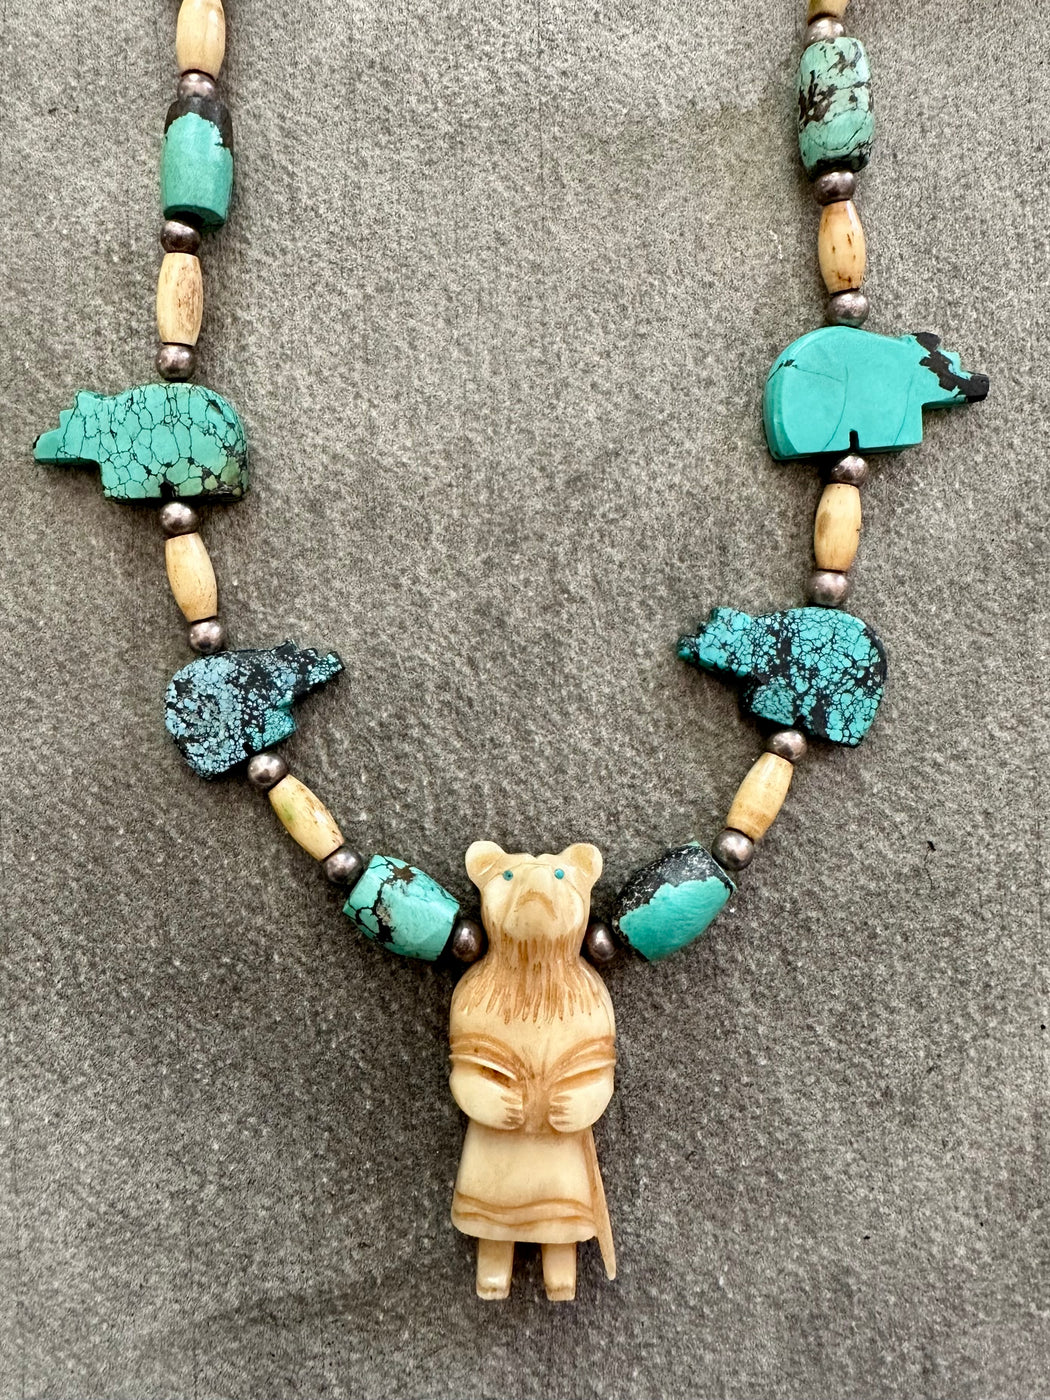 "Bear" Bone and Turquoise Necklace by Carolyn Roberts